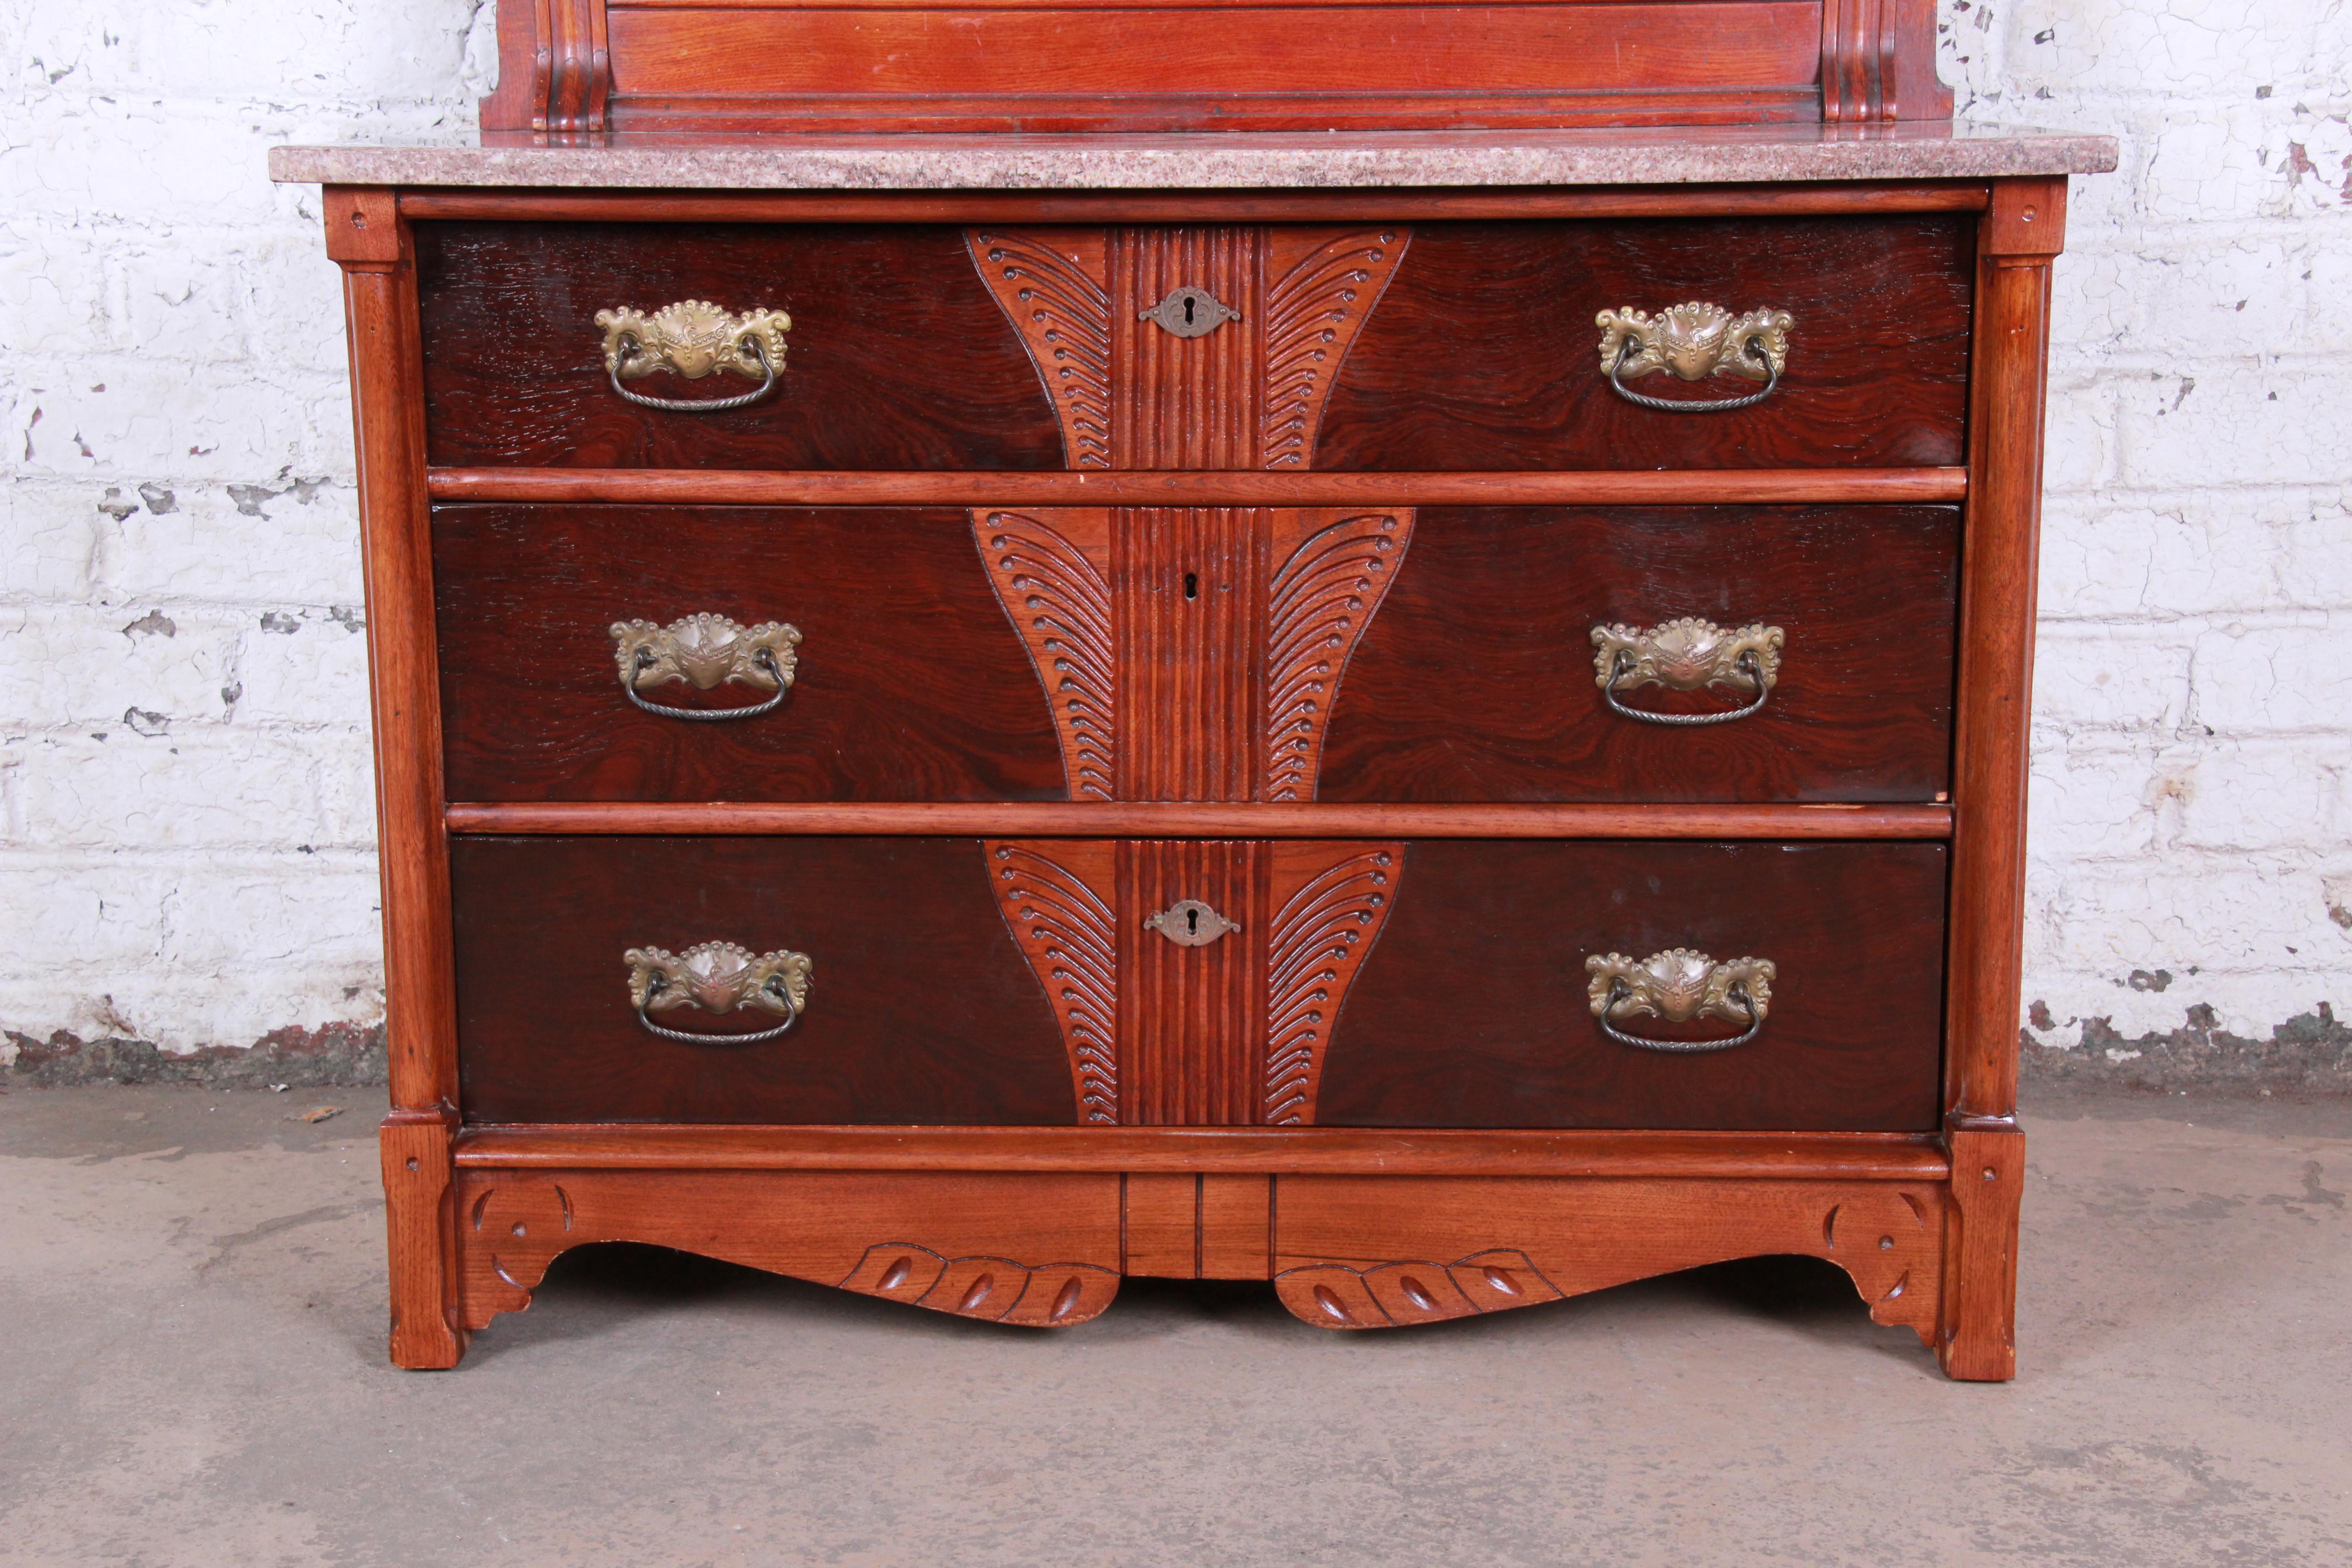 A gorgeous 19th century Victorian carved walnut and rosewood marble top dresser with mirror. The dresser features beautiful carved wood details, with solid walnut construction and stunning rosewood drawer fronts. It has a nice beveled marble top, as